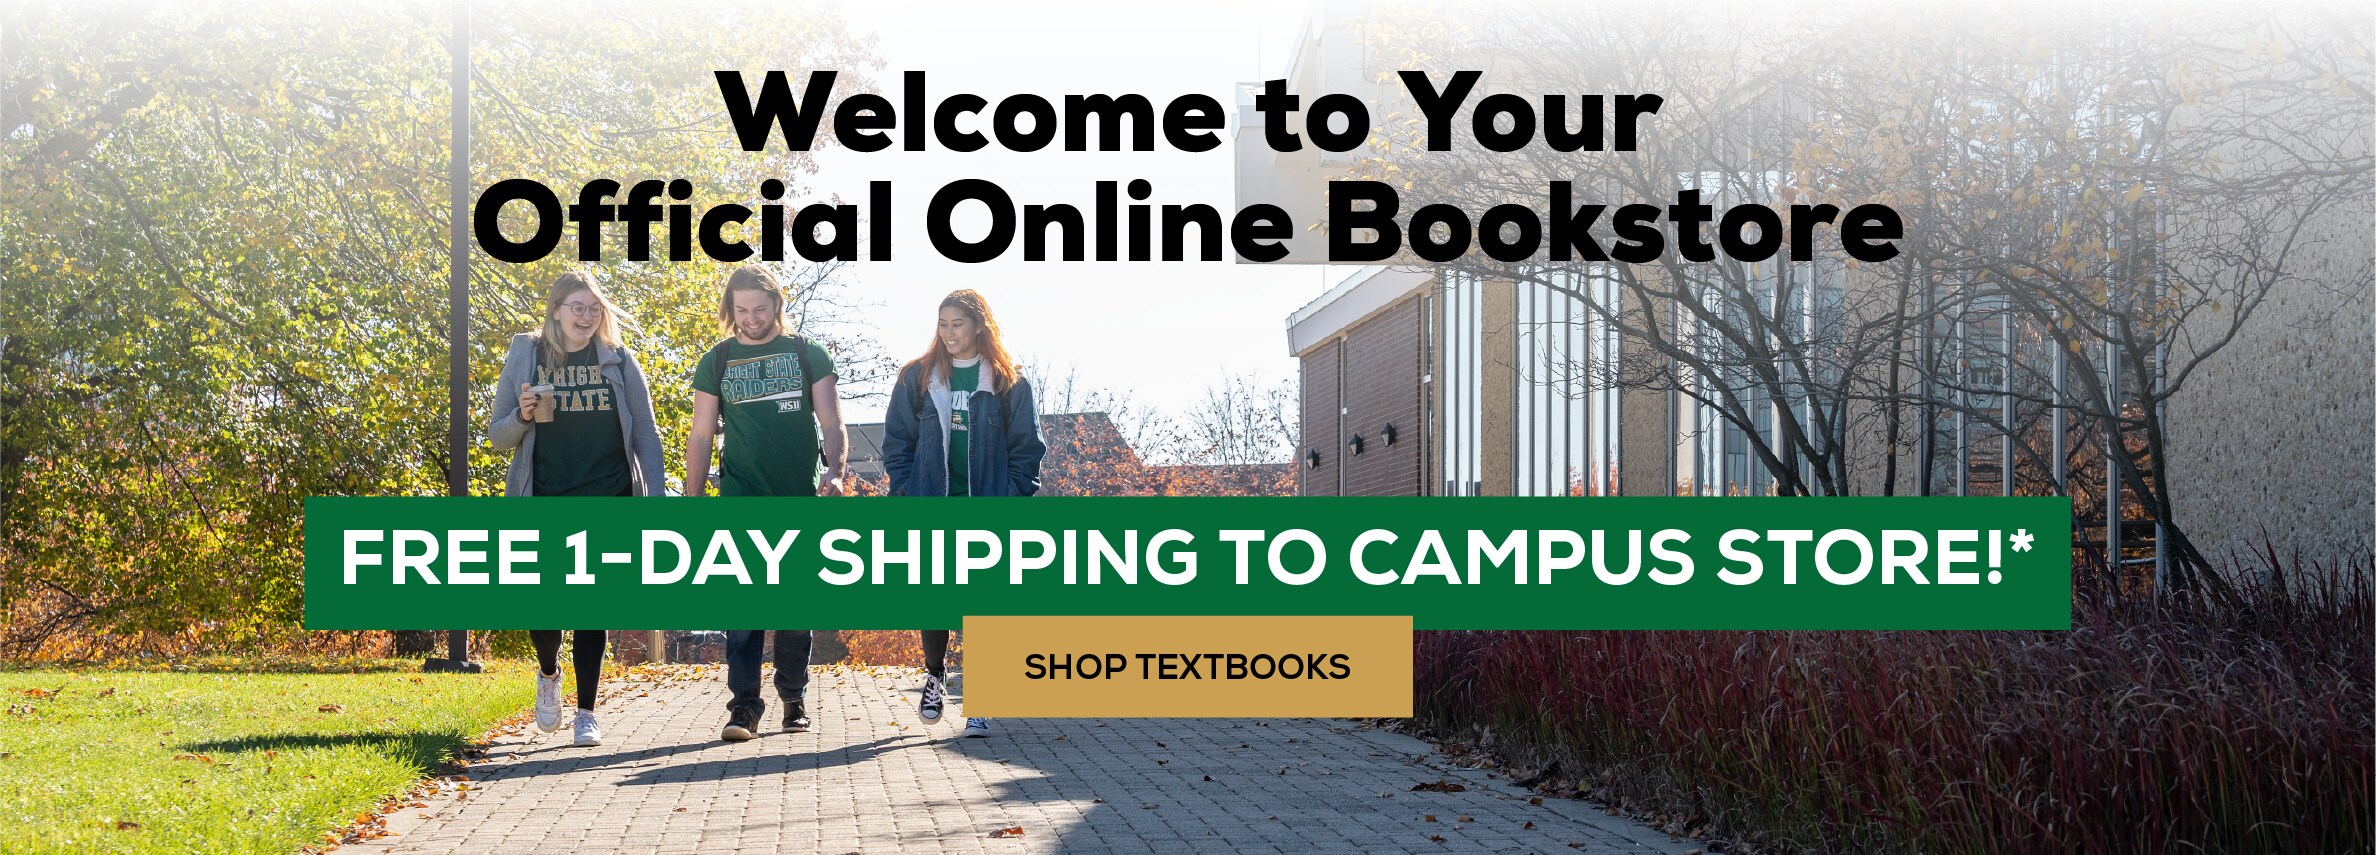 Welcome to your official online bookstore. Free 1-Day Shipping to Campus Store! Shop textbooks.